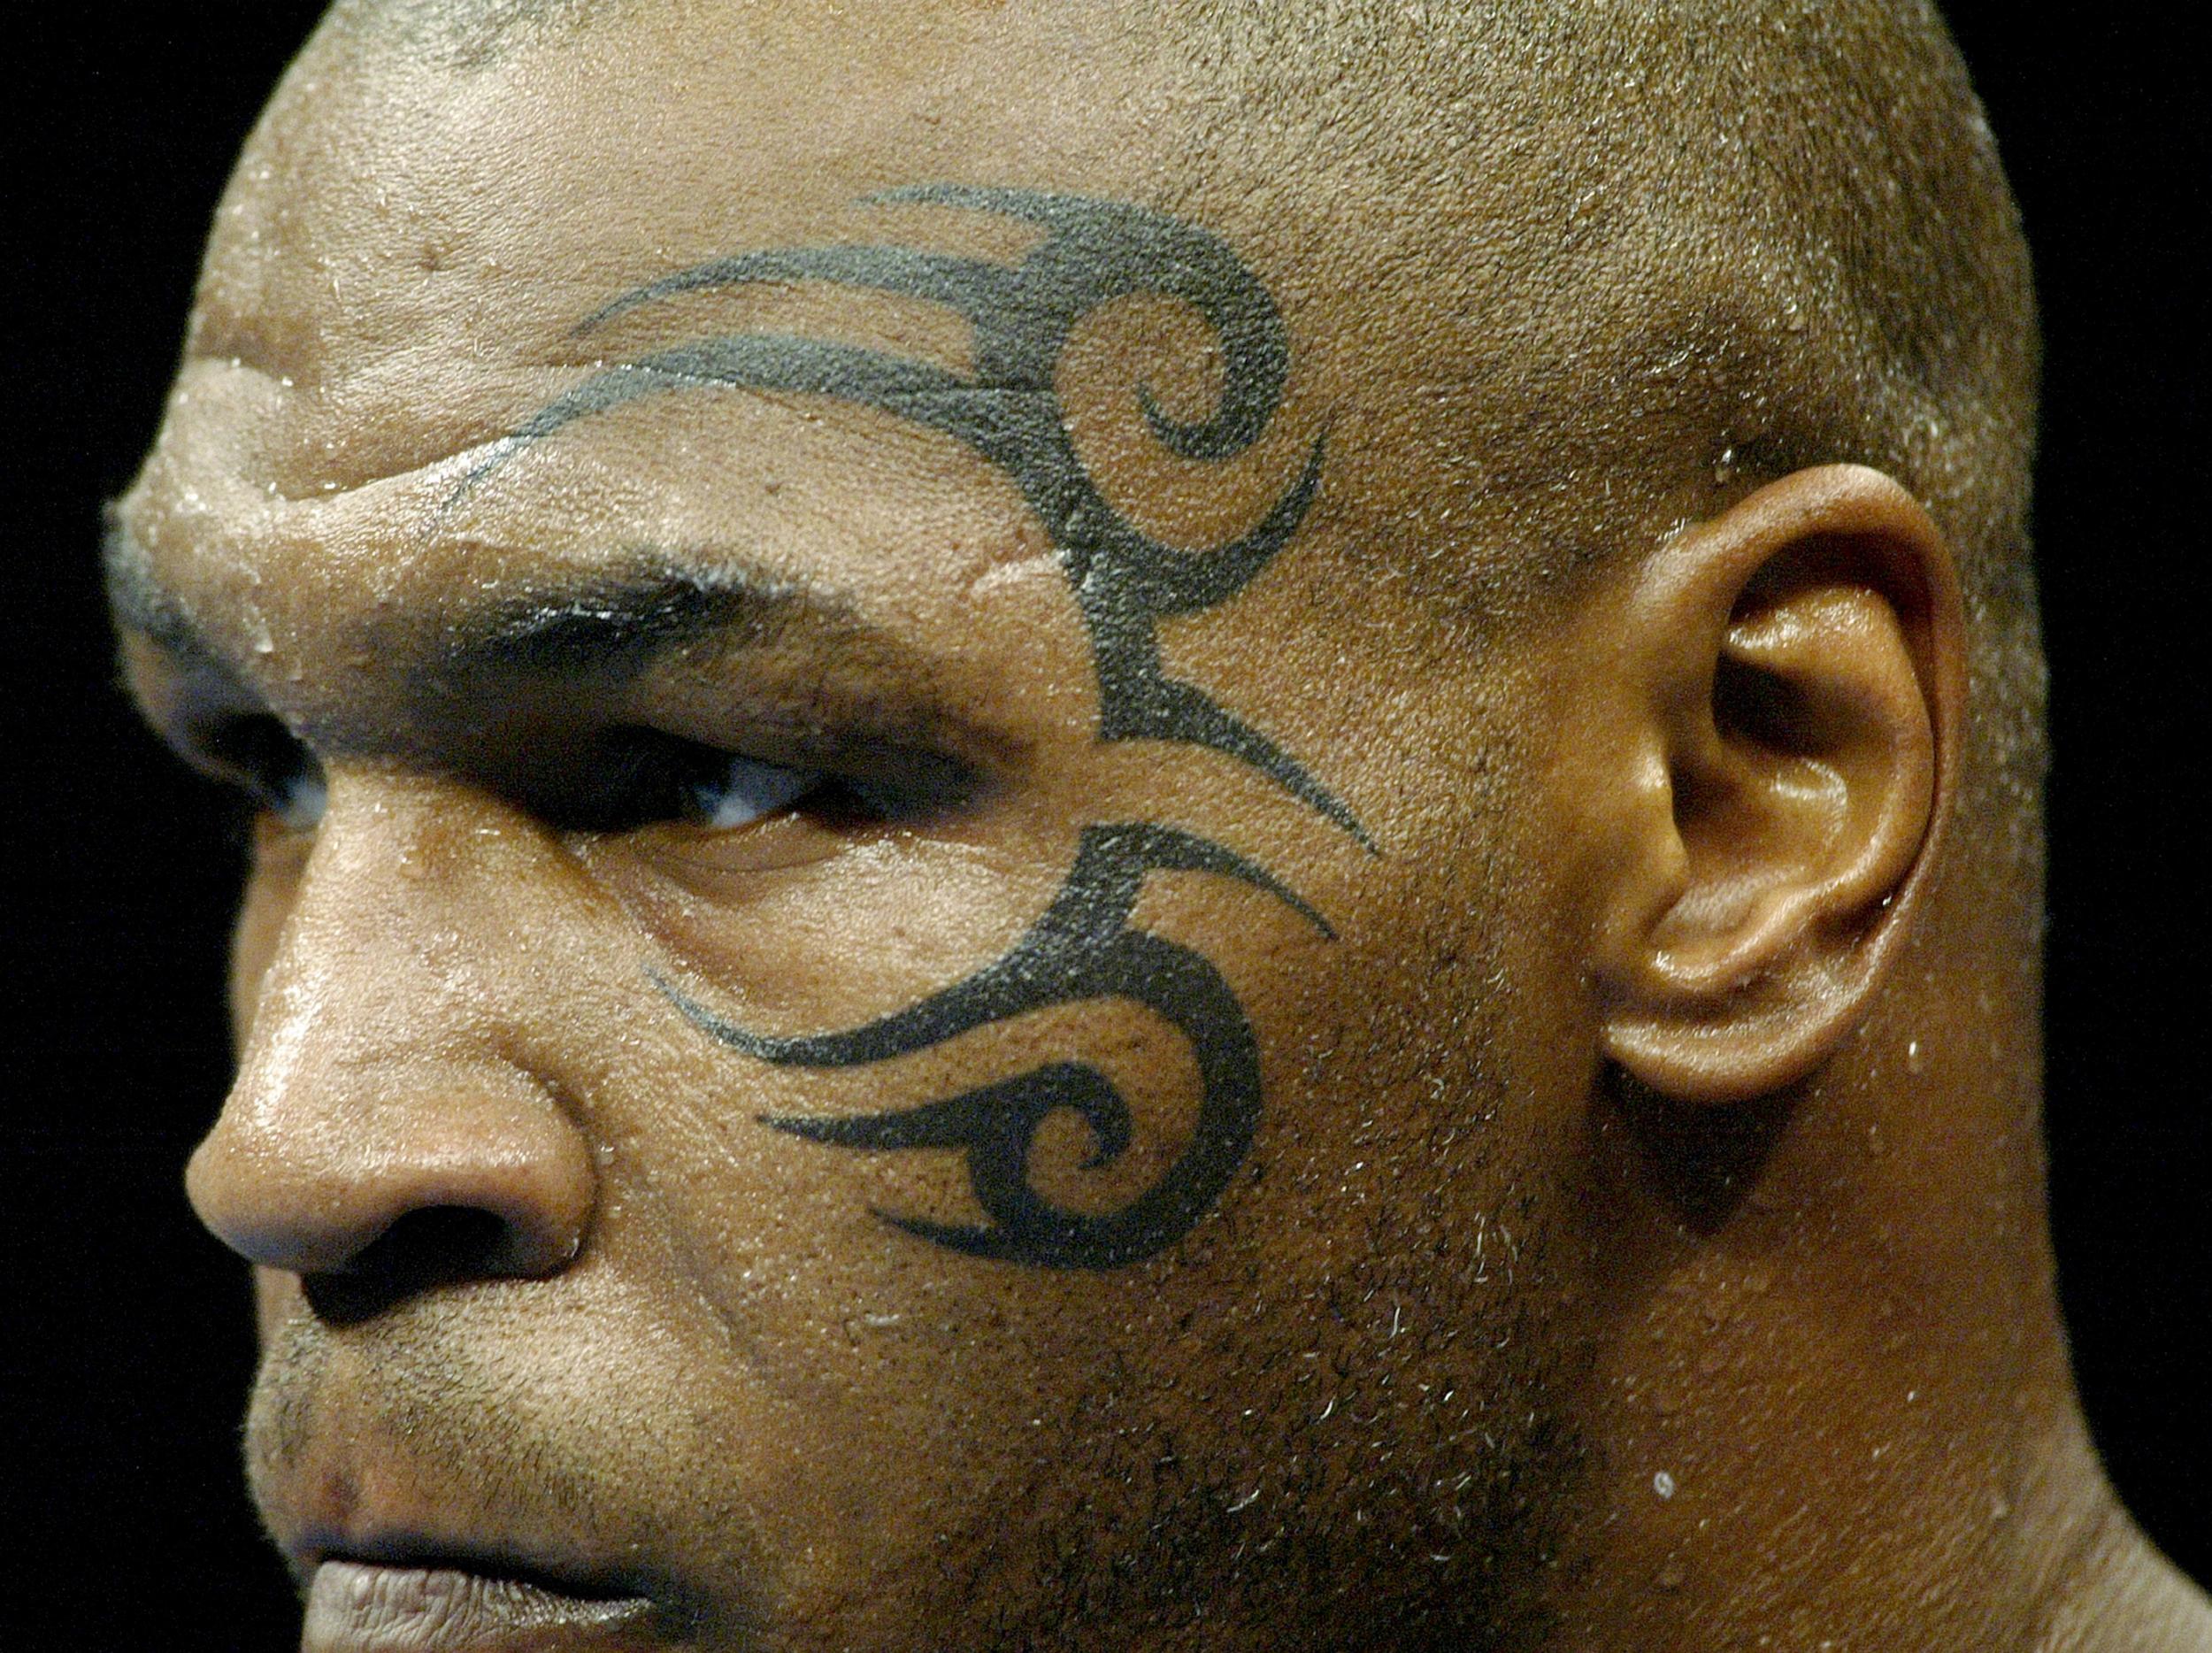 The controversial reason behind Mike Tyson's infamous face tattoo